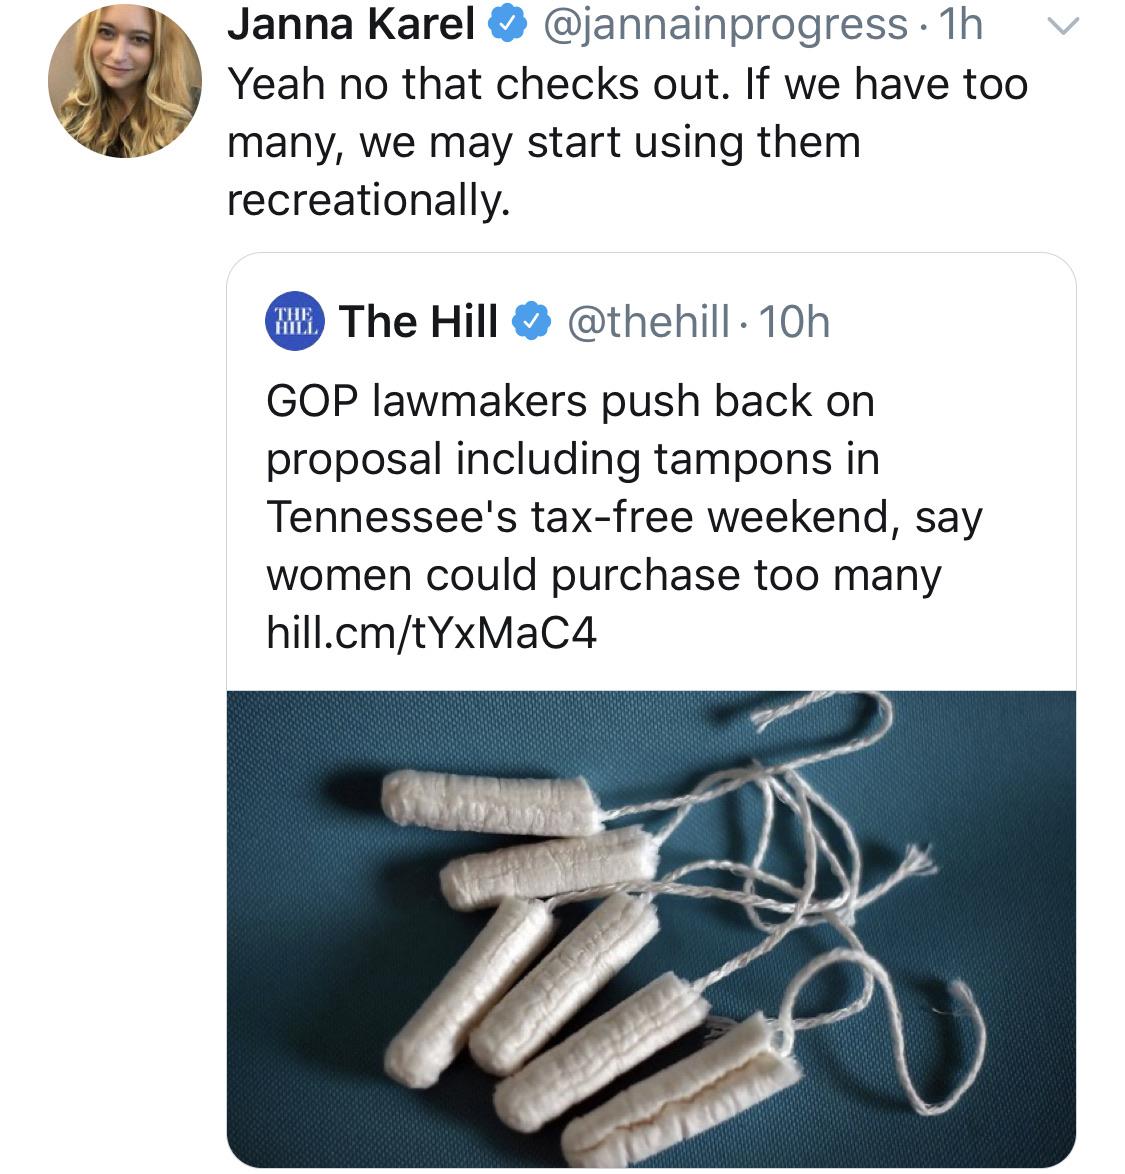 Recreational tampons are ruining families.